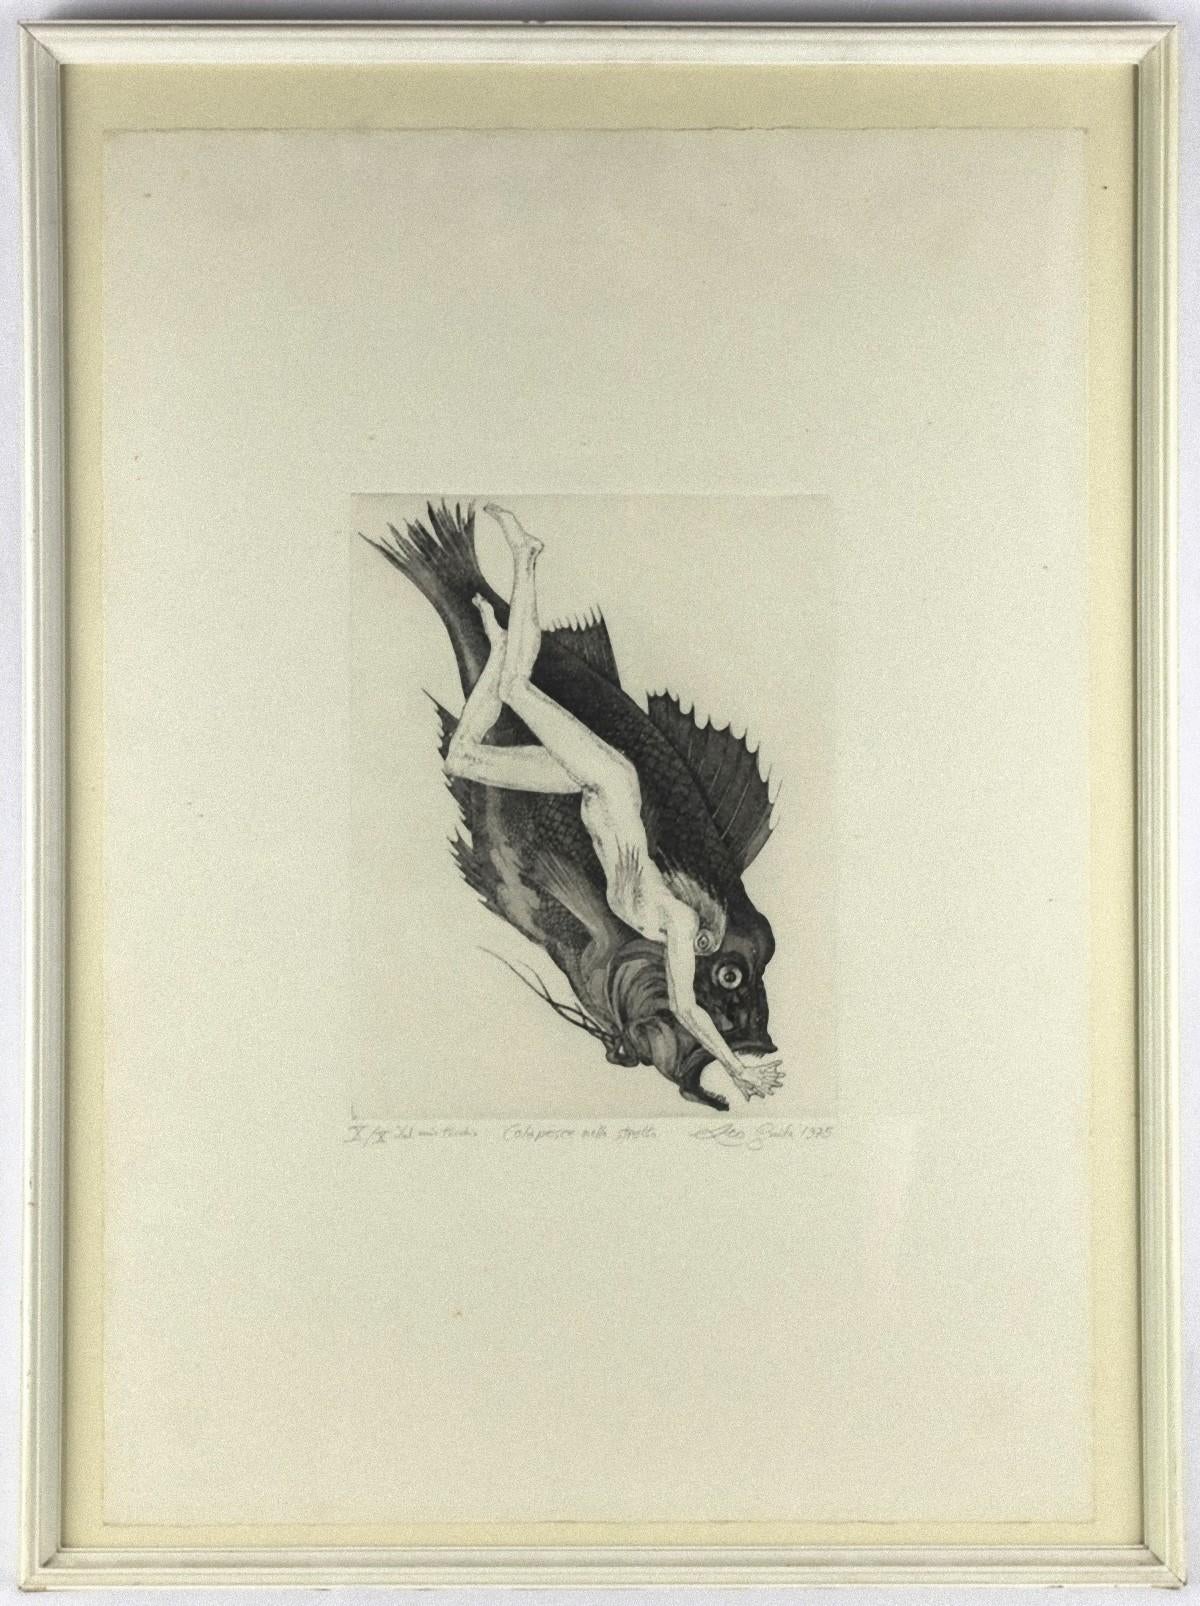 The Legend of Colapesce (Original Title: Colapesce nello stretto) is an original Contemporary artwork realized in 1972 by the Italian Contemporary artist Leo Guida (1992 - 2017).

Original Aquatint and Etching.

Numbered, Titled and Hand-signed in